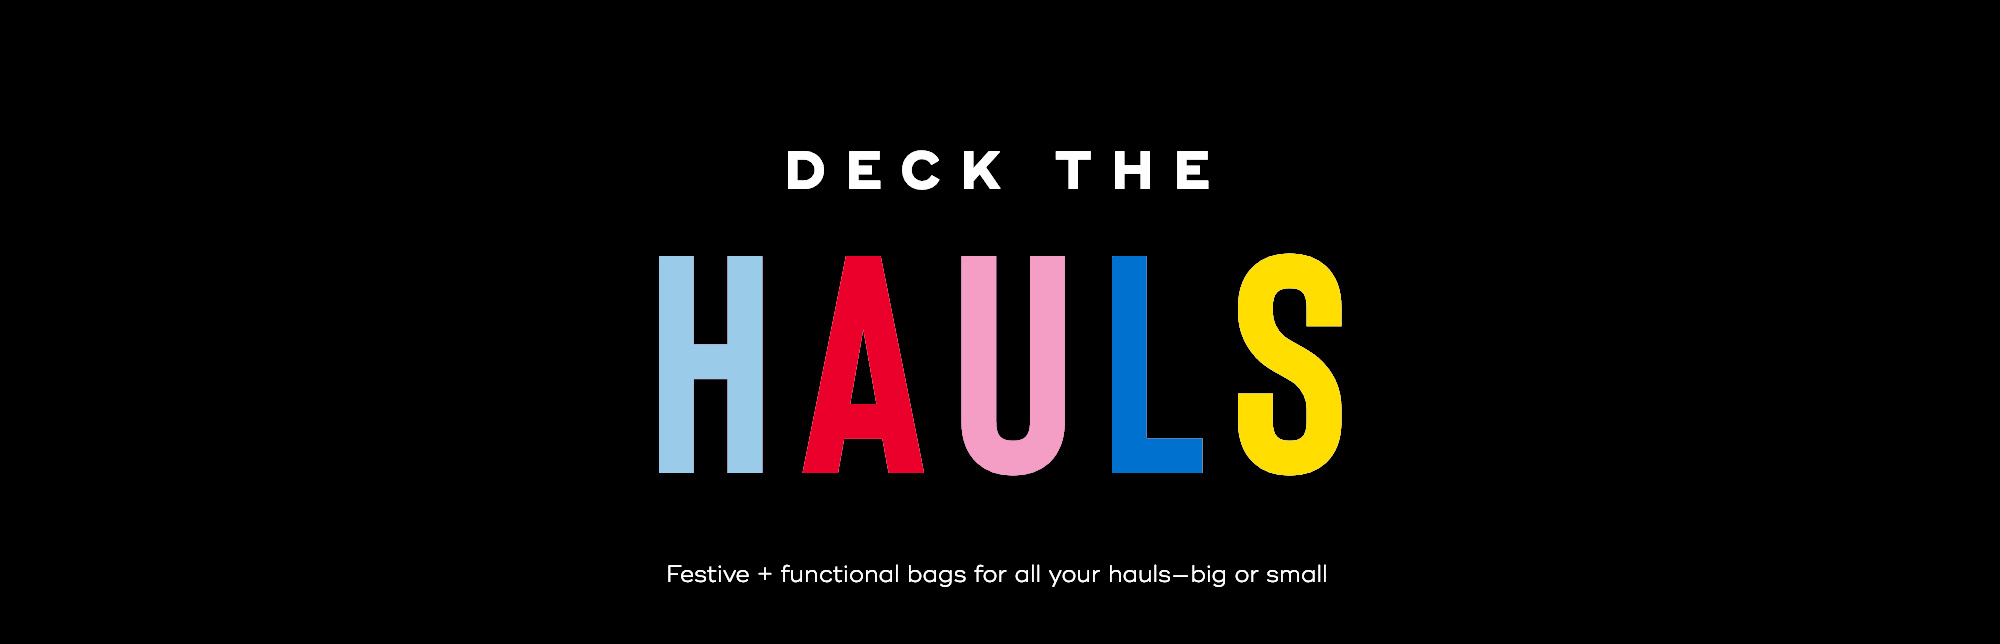 DECK THE HAULS: Festive + functional bags for all your hauls—big or small